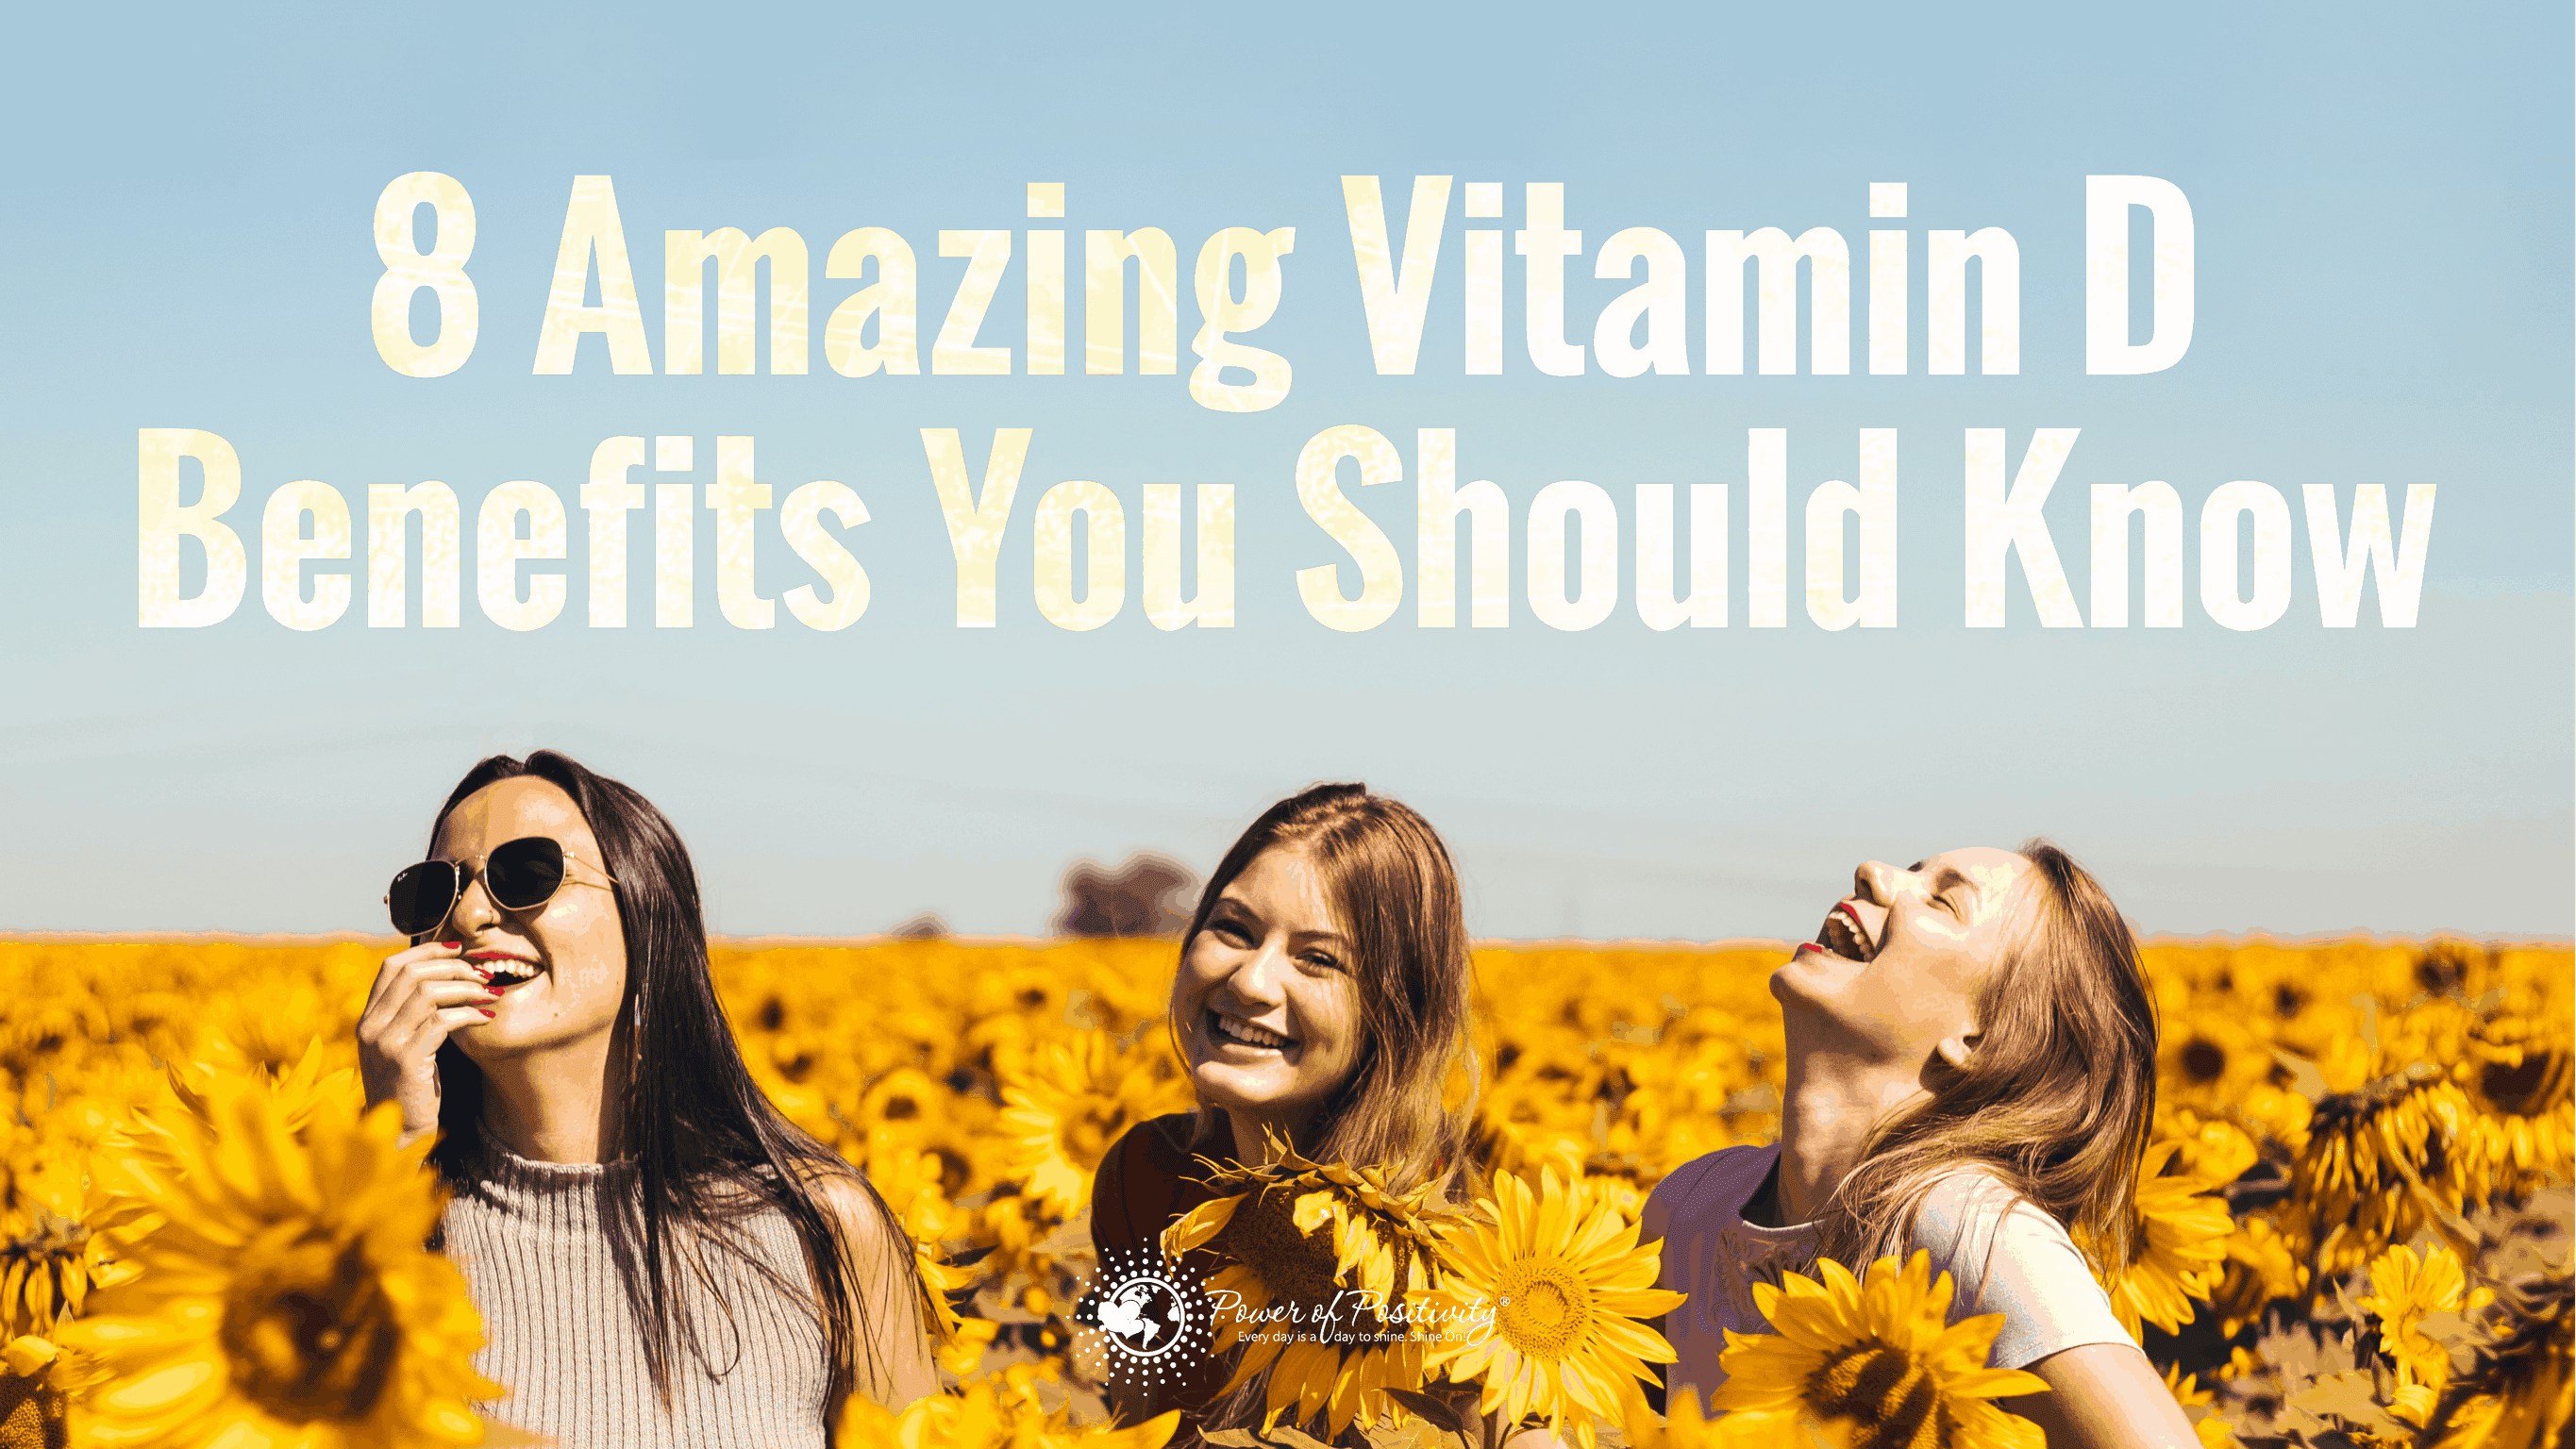 8 Amazing Vitamin D Benefits You Should Know